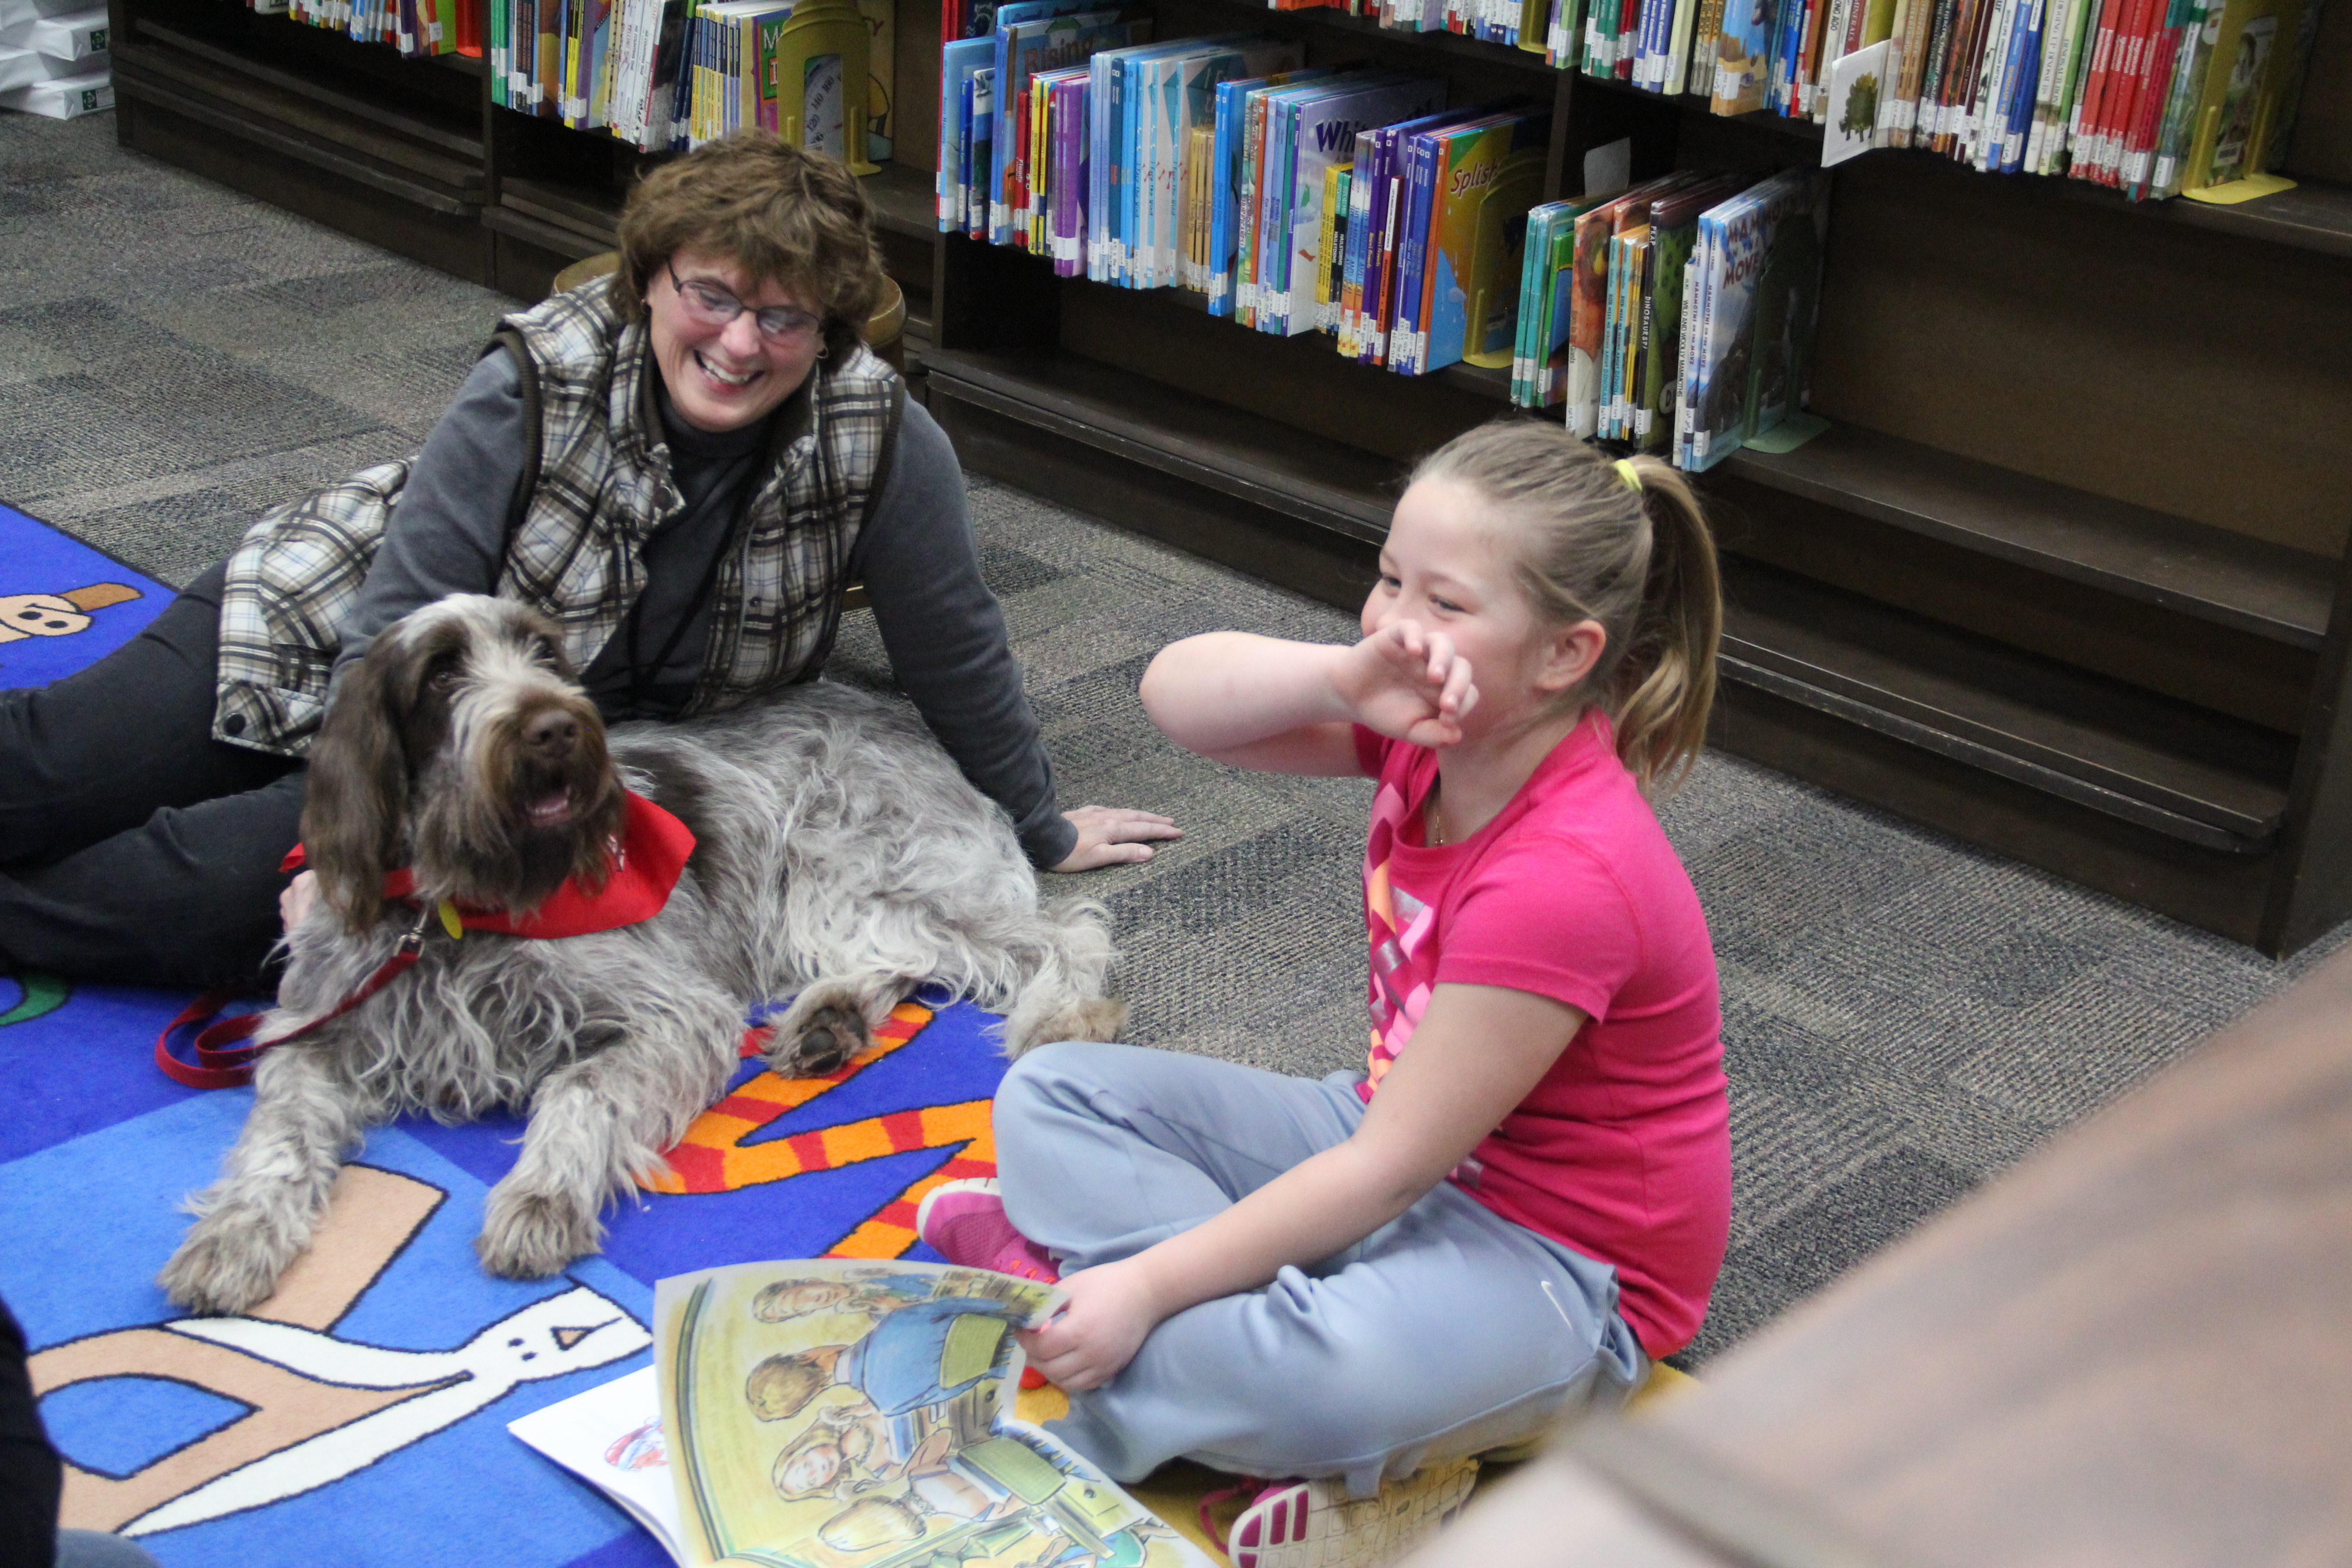 Paws for vocabulary: Kids read with canine friends